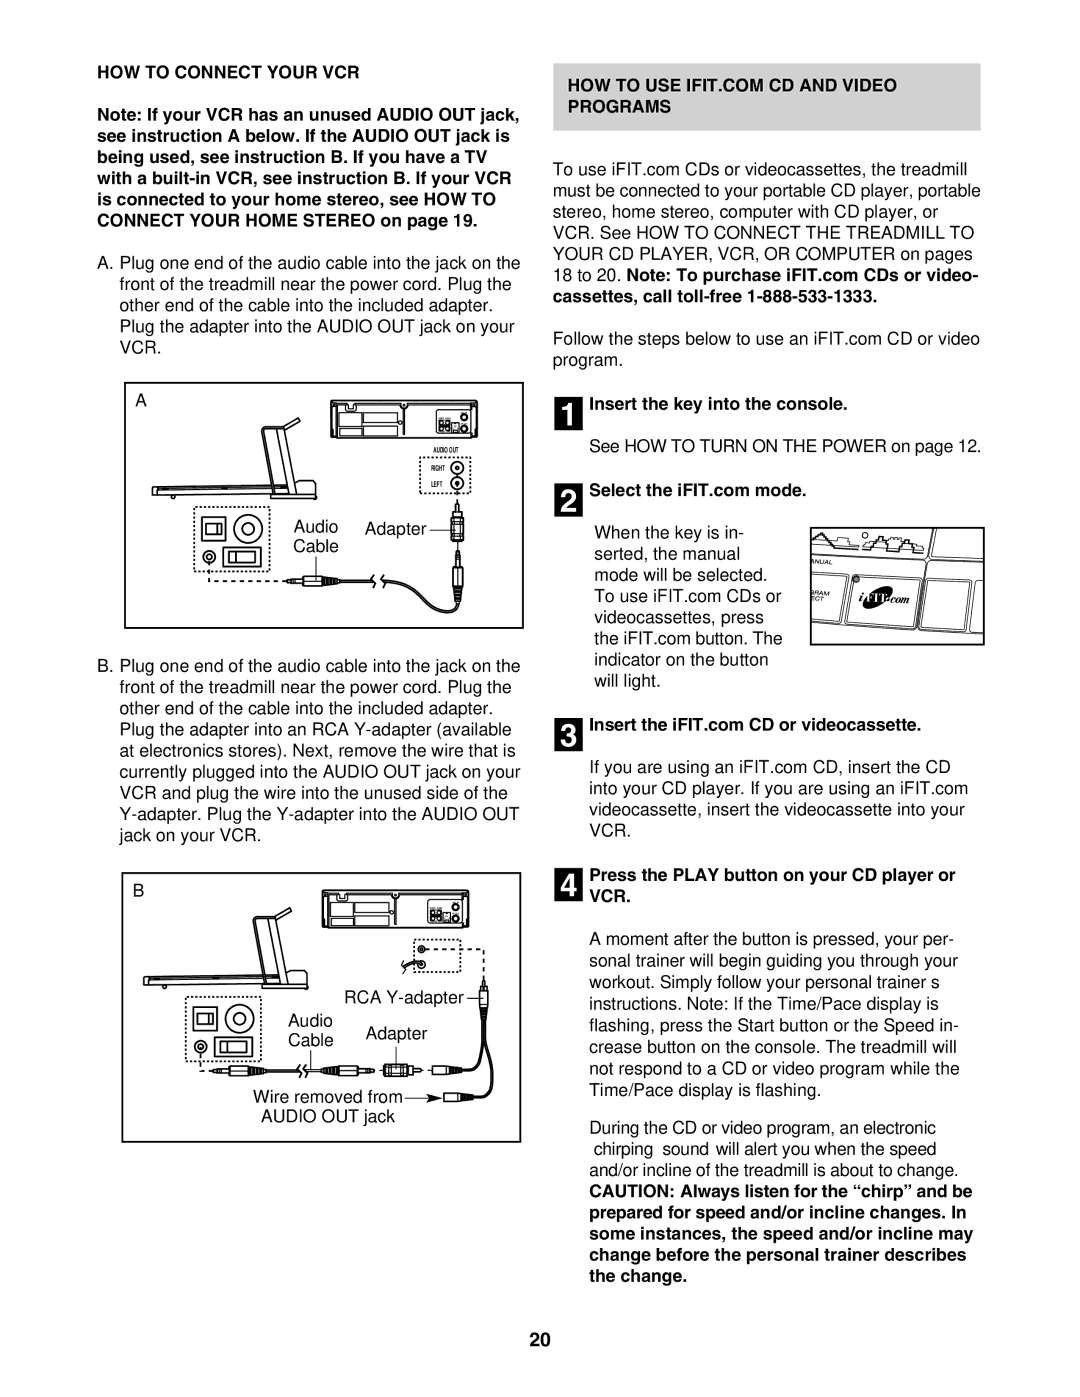 ProForm DTL52942 user manual HOW to Connect Your VCR, Audio Adapter Cable, Insert the key into the console 